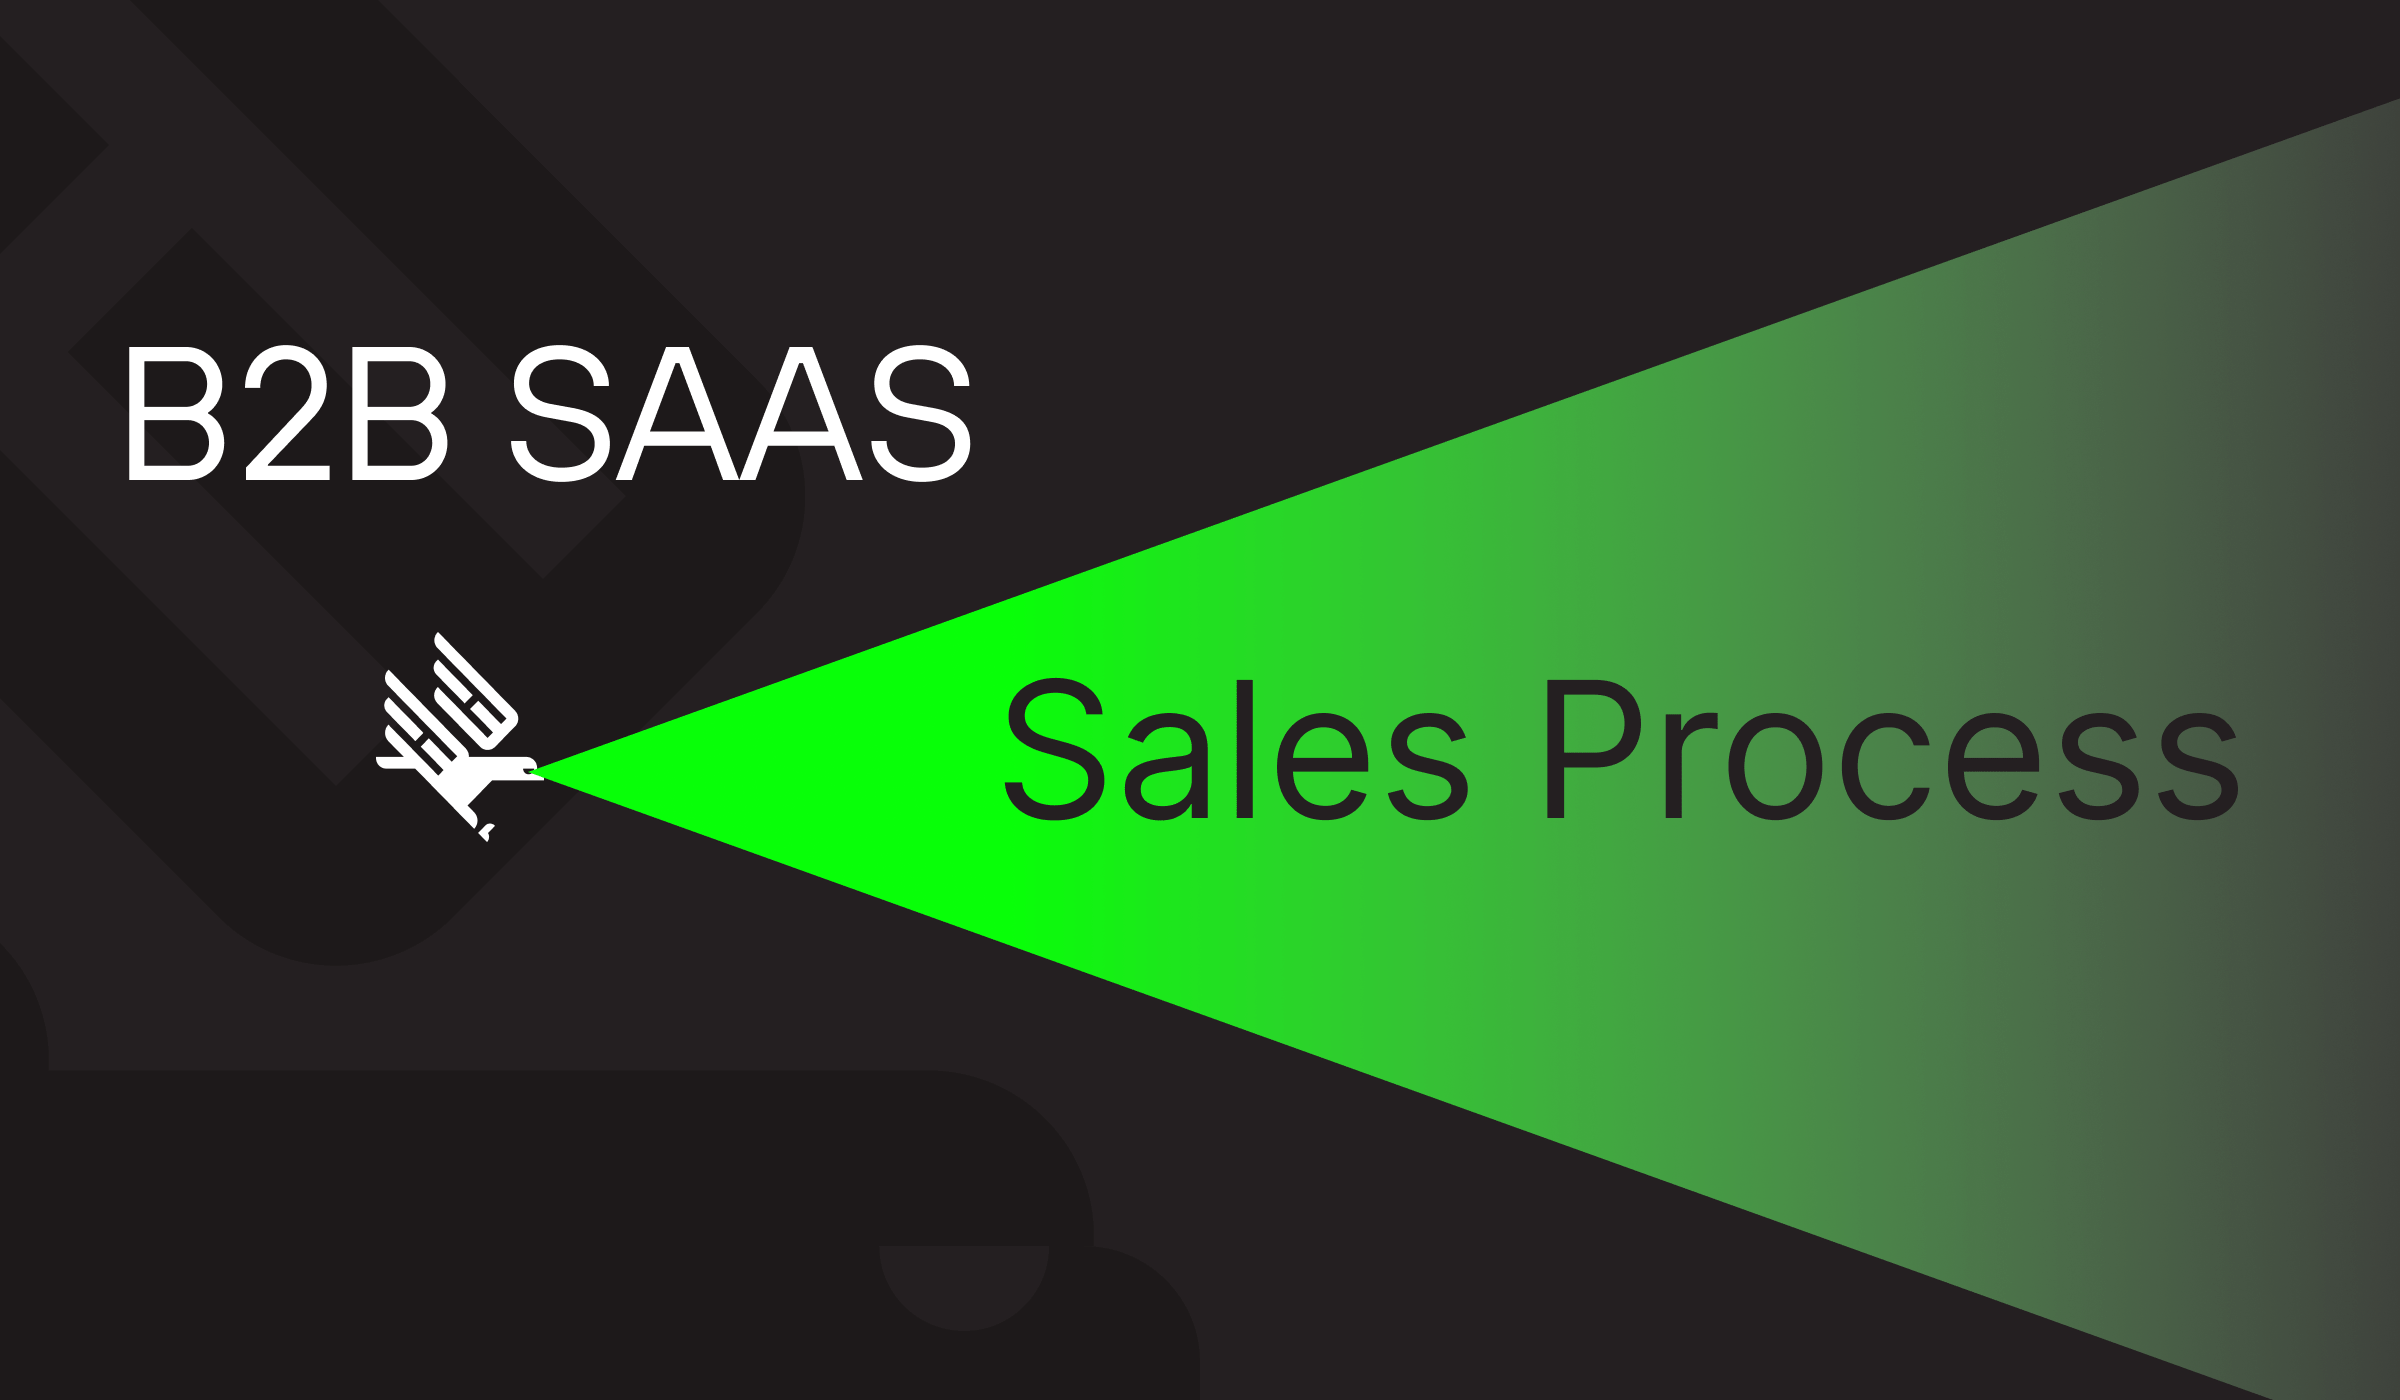 An image depicting a funnel as part of an article about the B2B SaaS Sales Process.